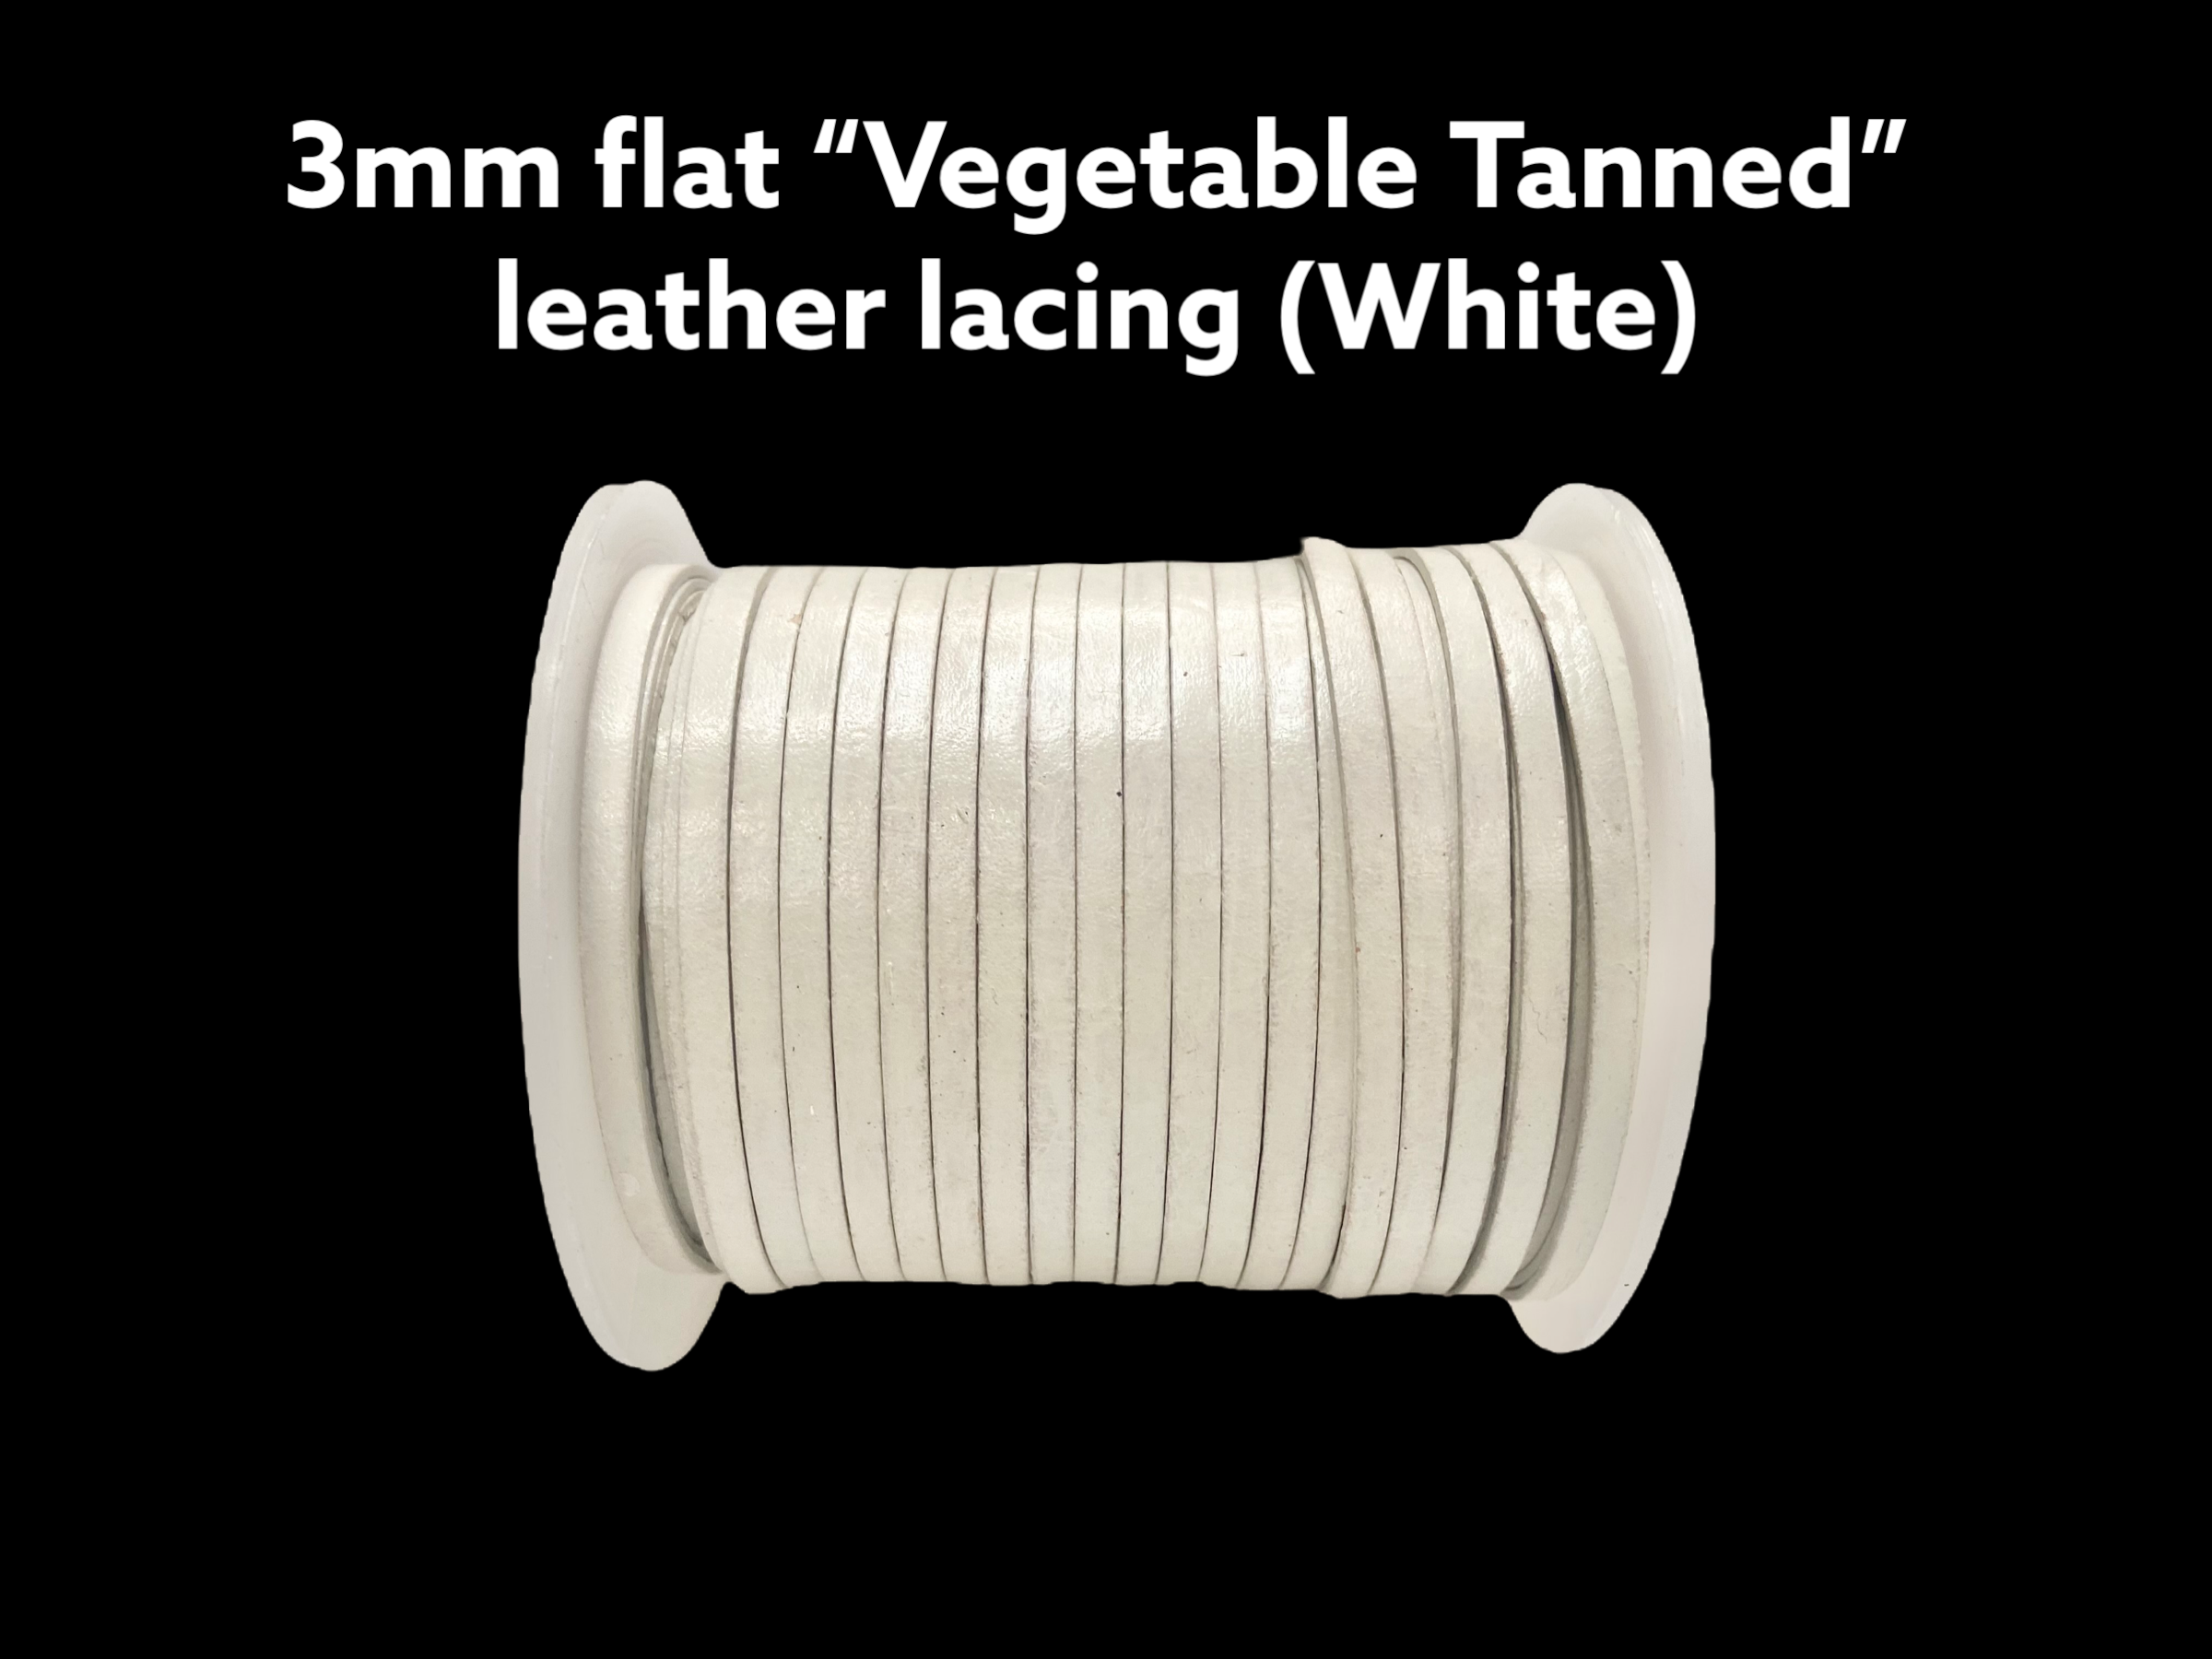 Vegetable Tanned "Flat" Leather Lacing Variants (3mm or 6mm).